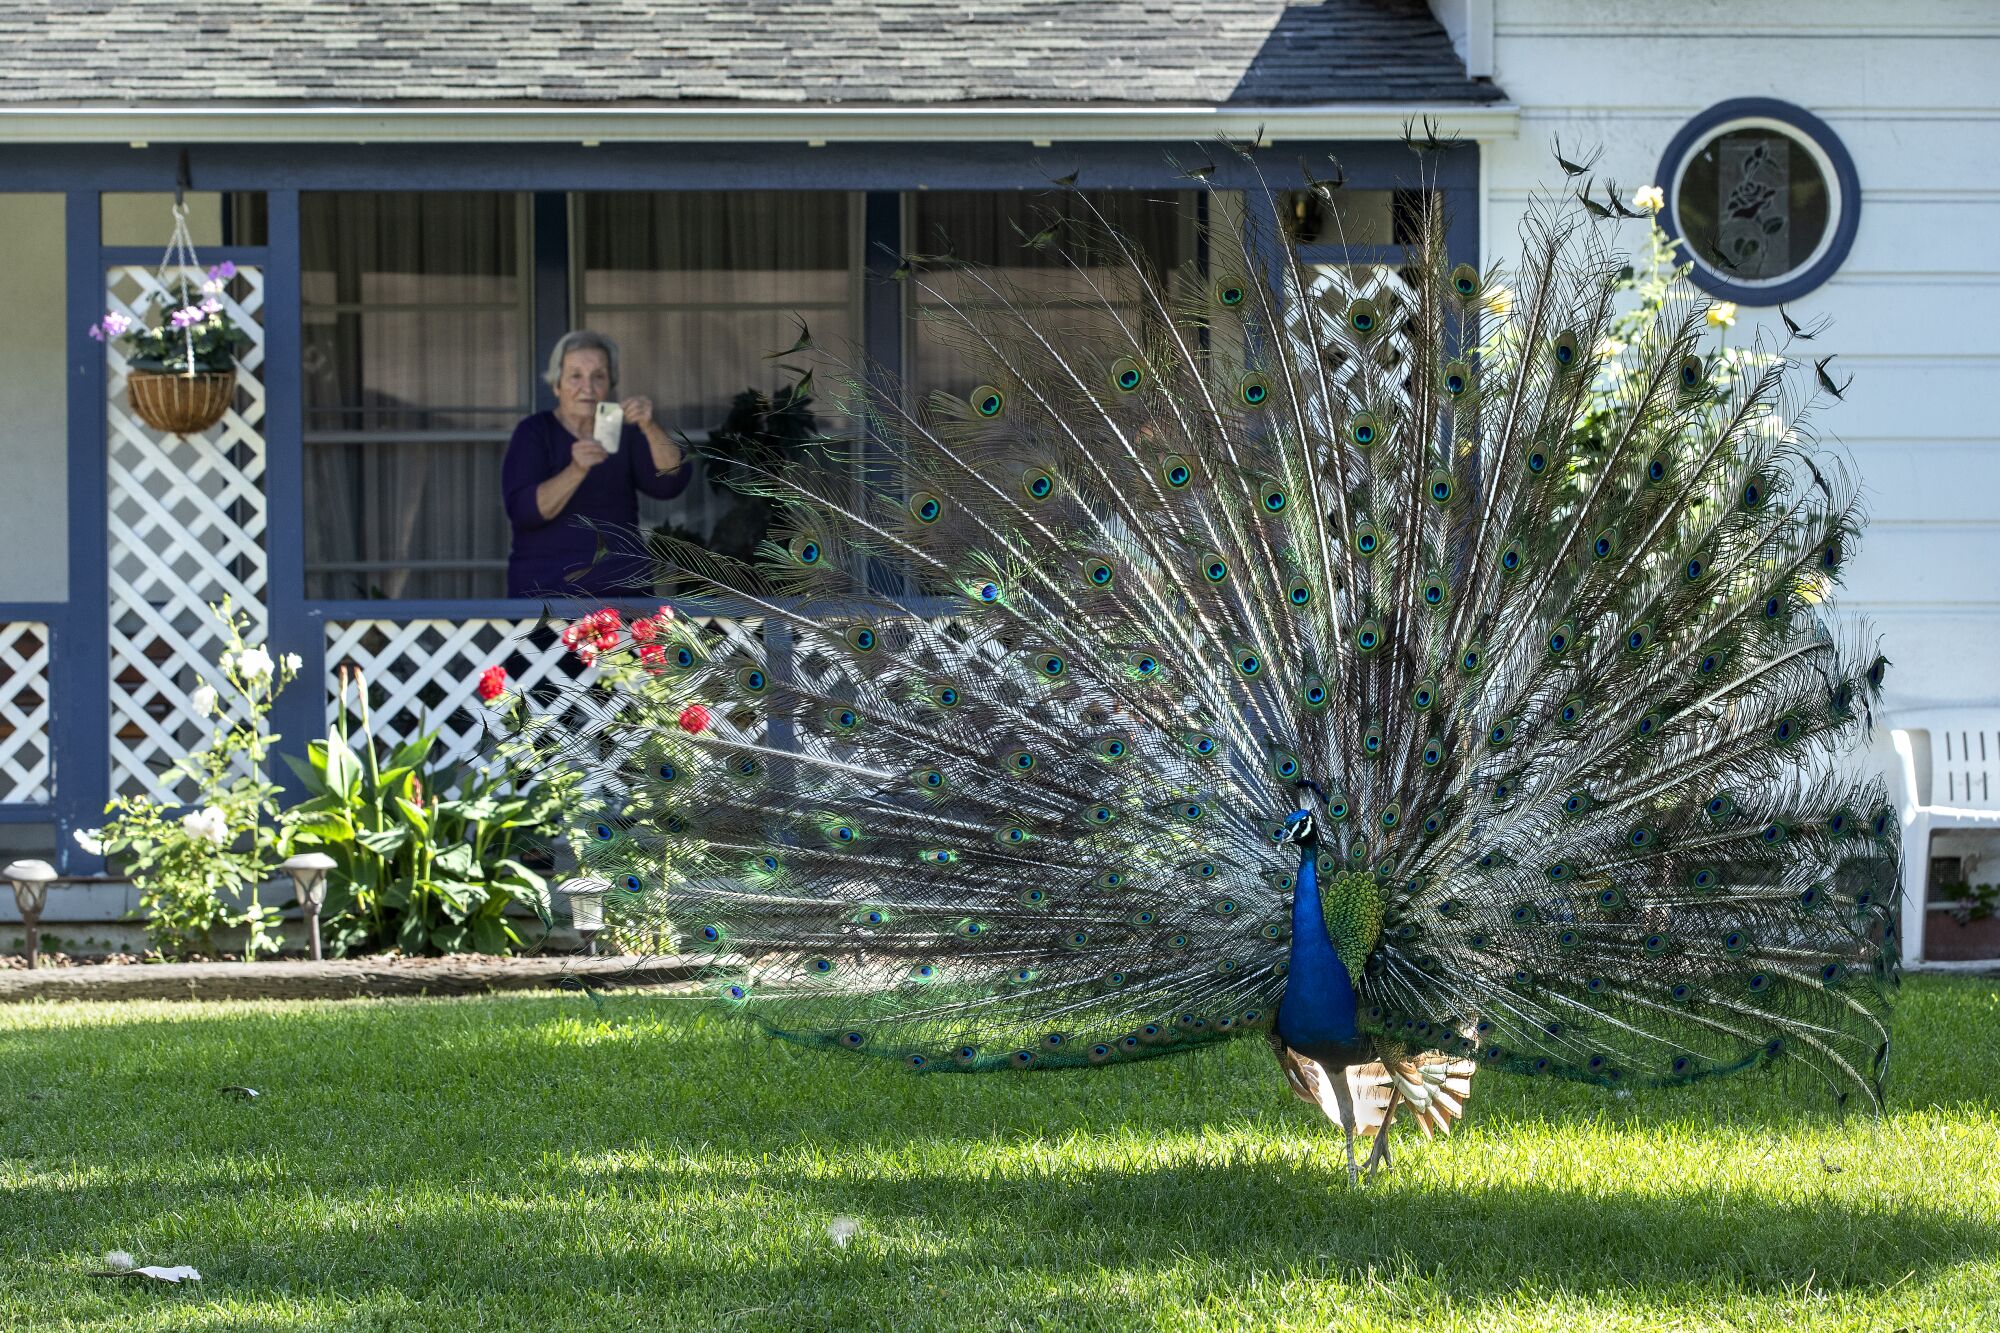 A woman on her front porch photographs a peacock in her yard